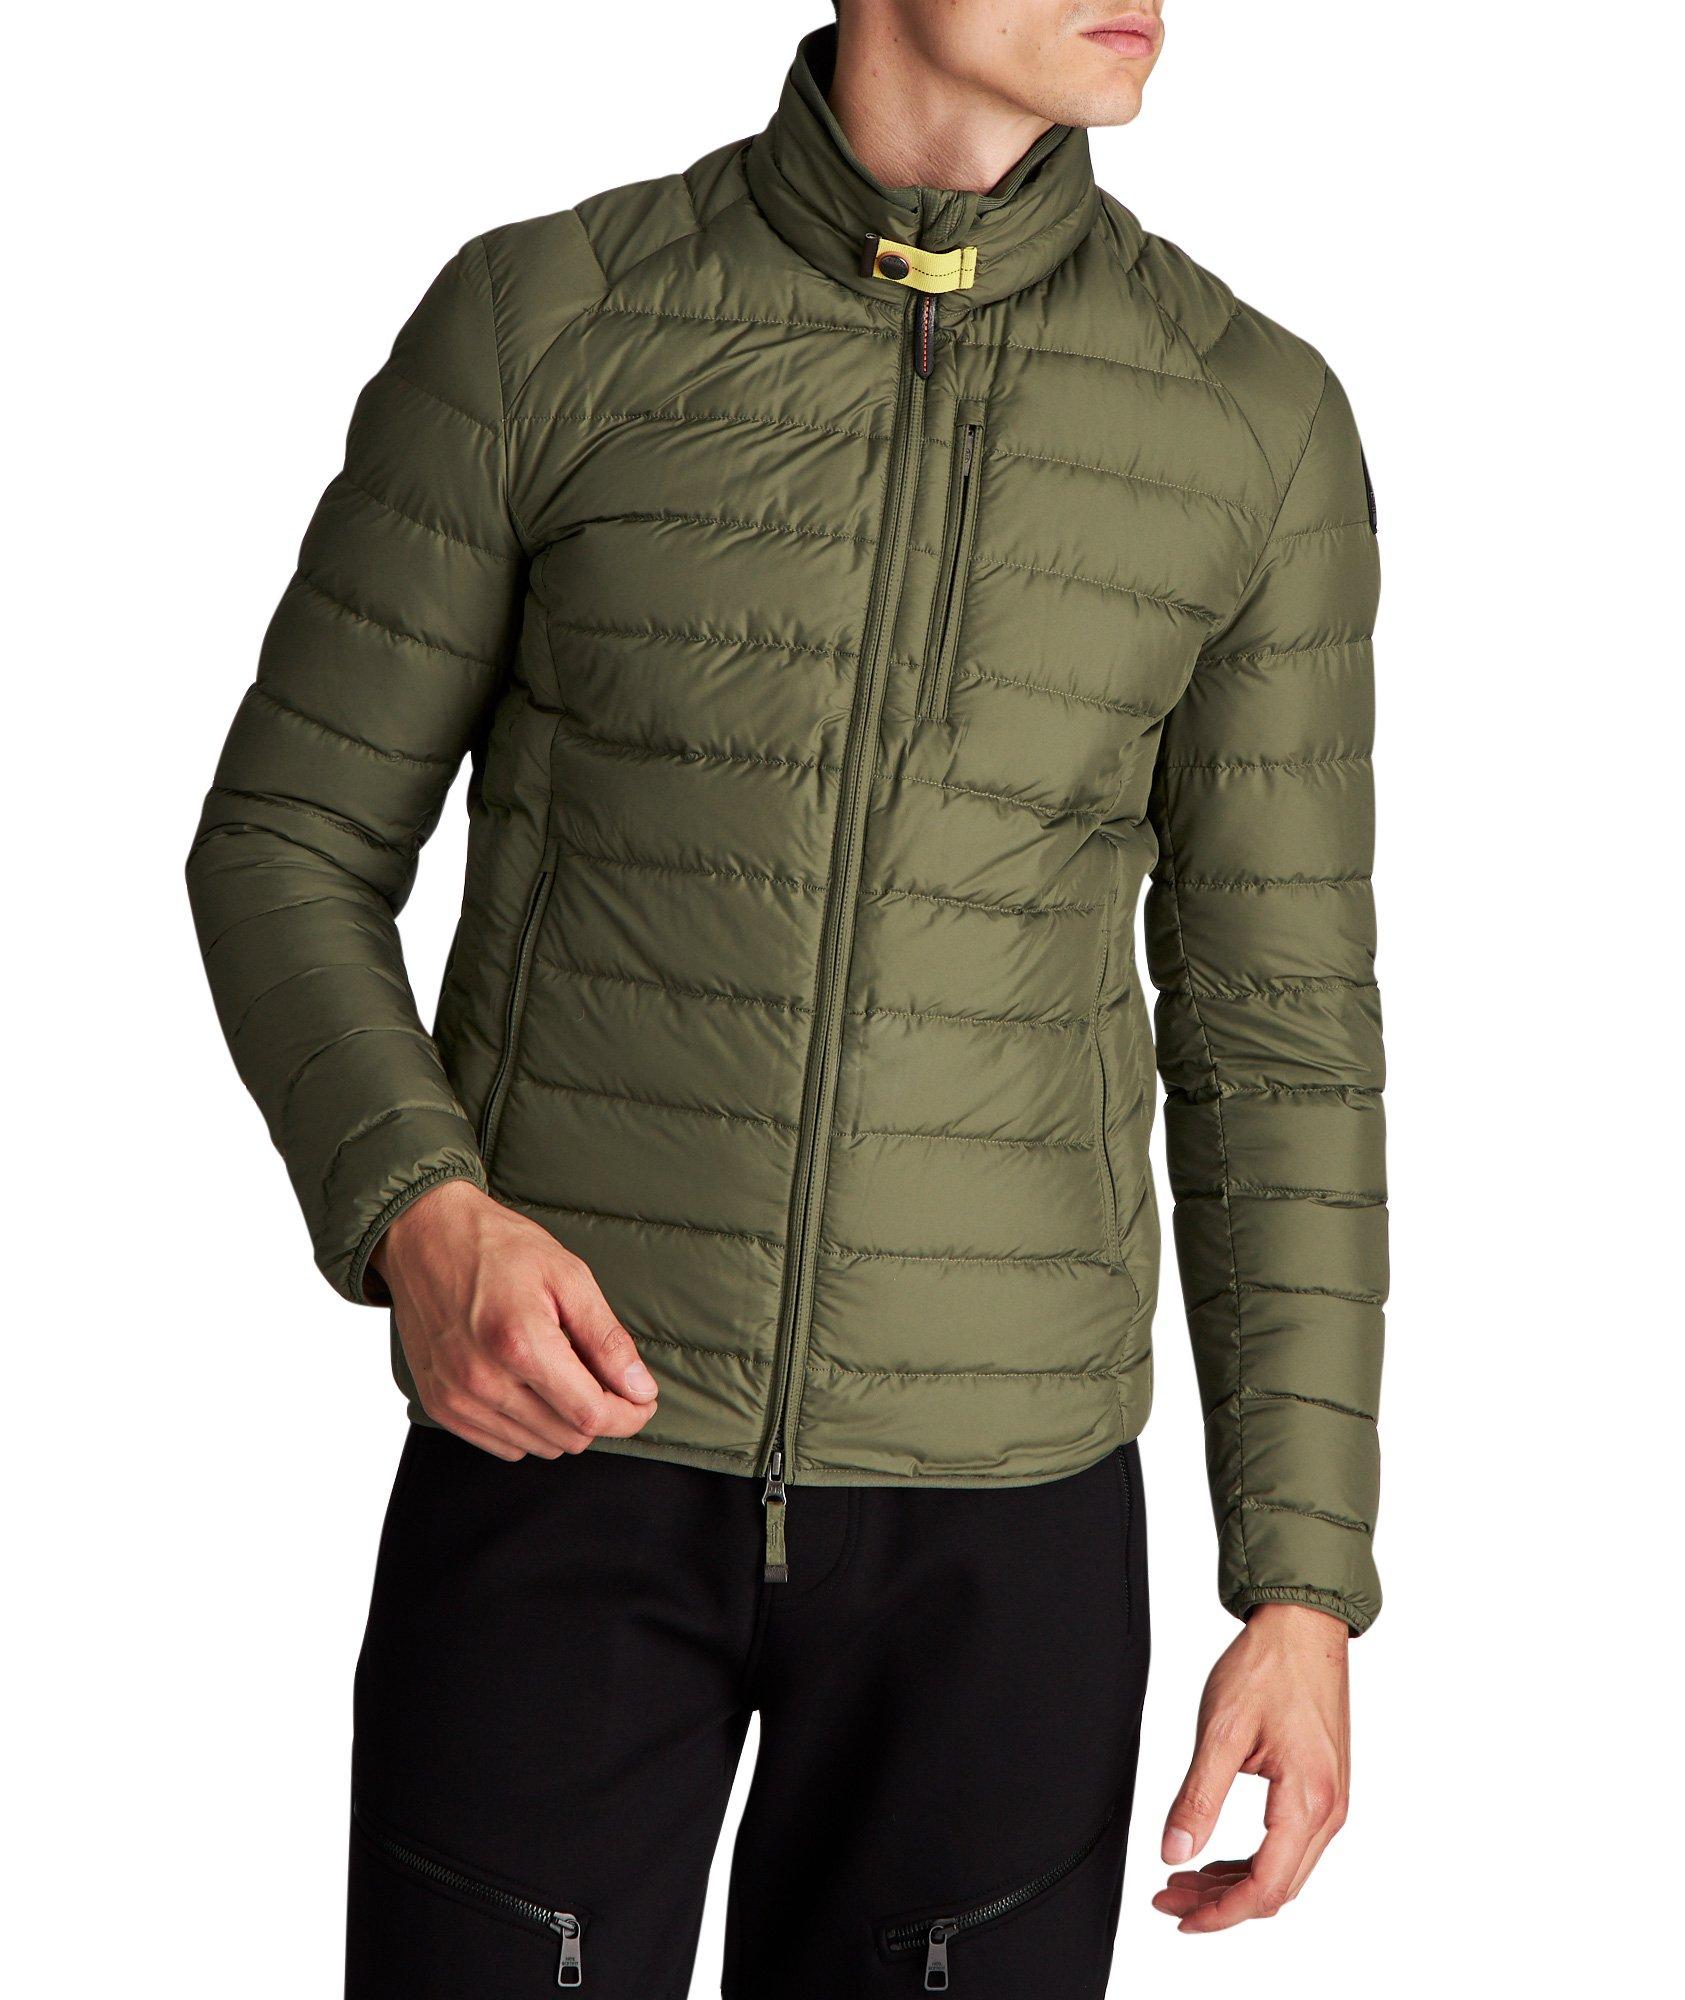 parajumpers puffer jacket